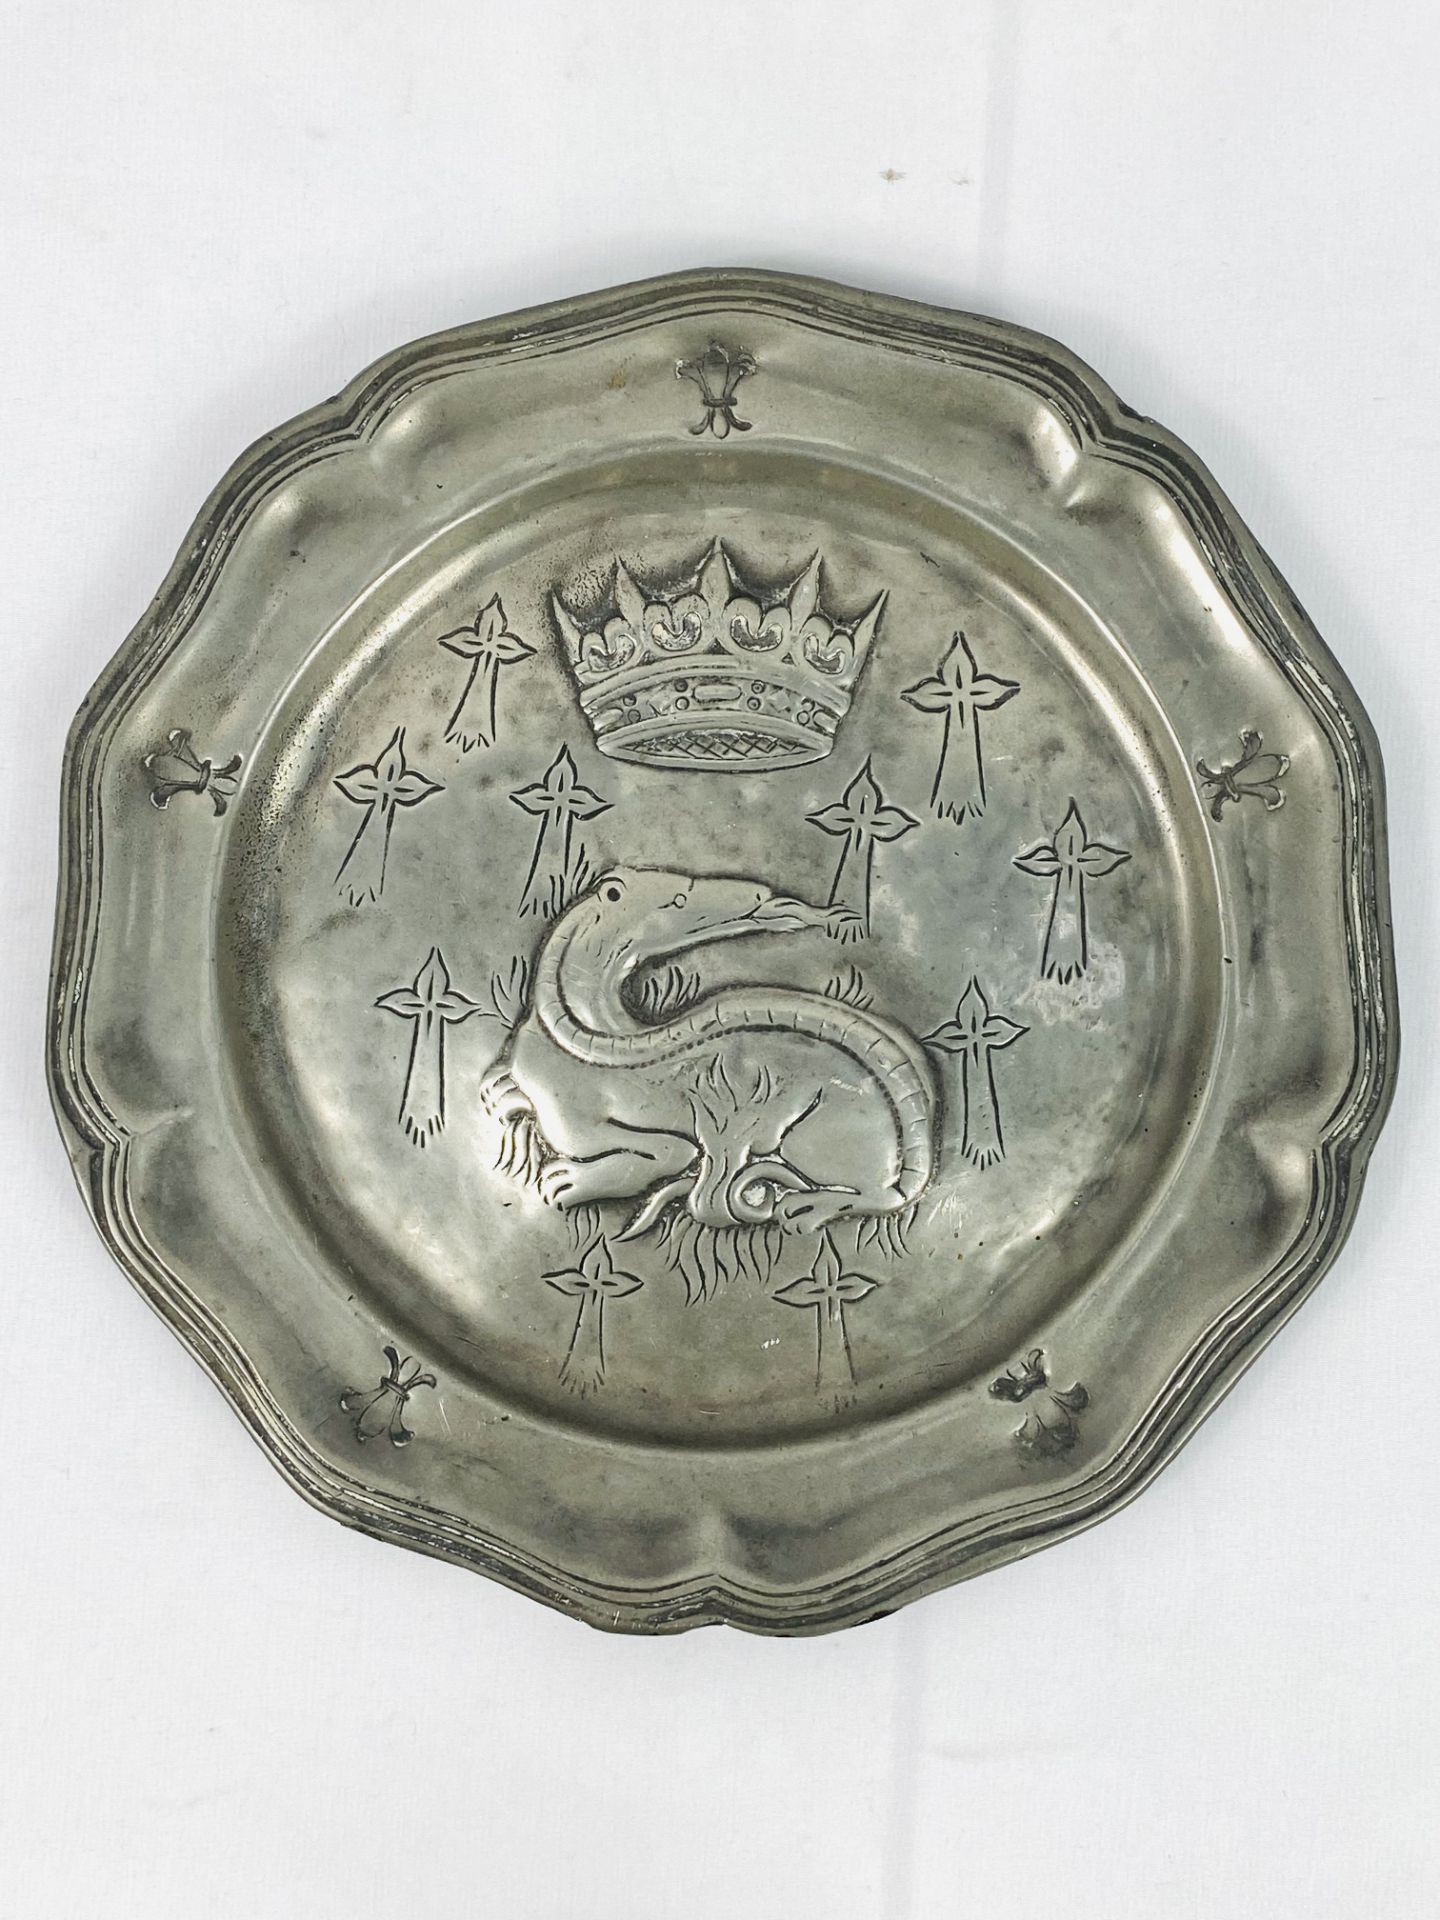 Continental pewter plate and other items - Image 3 of 3